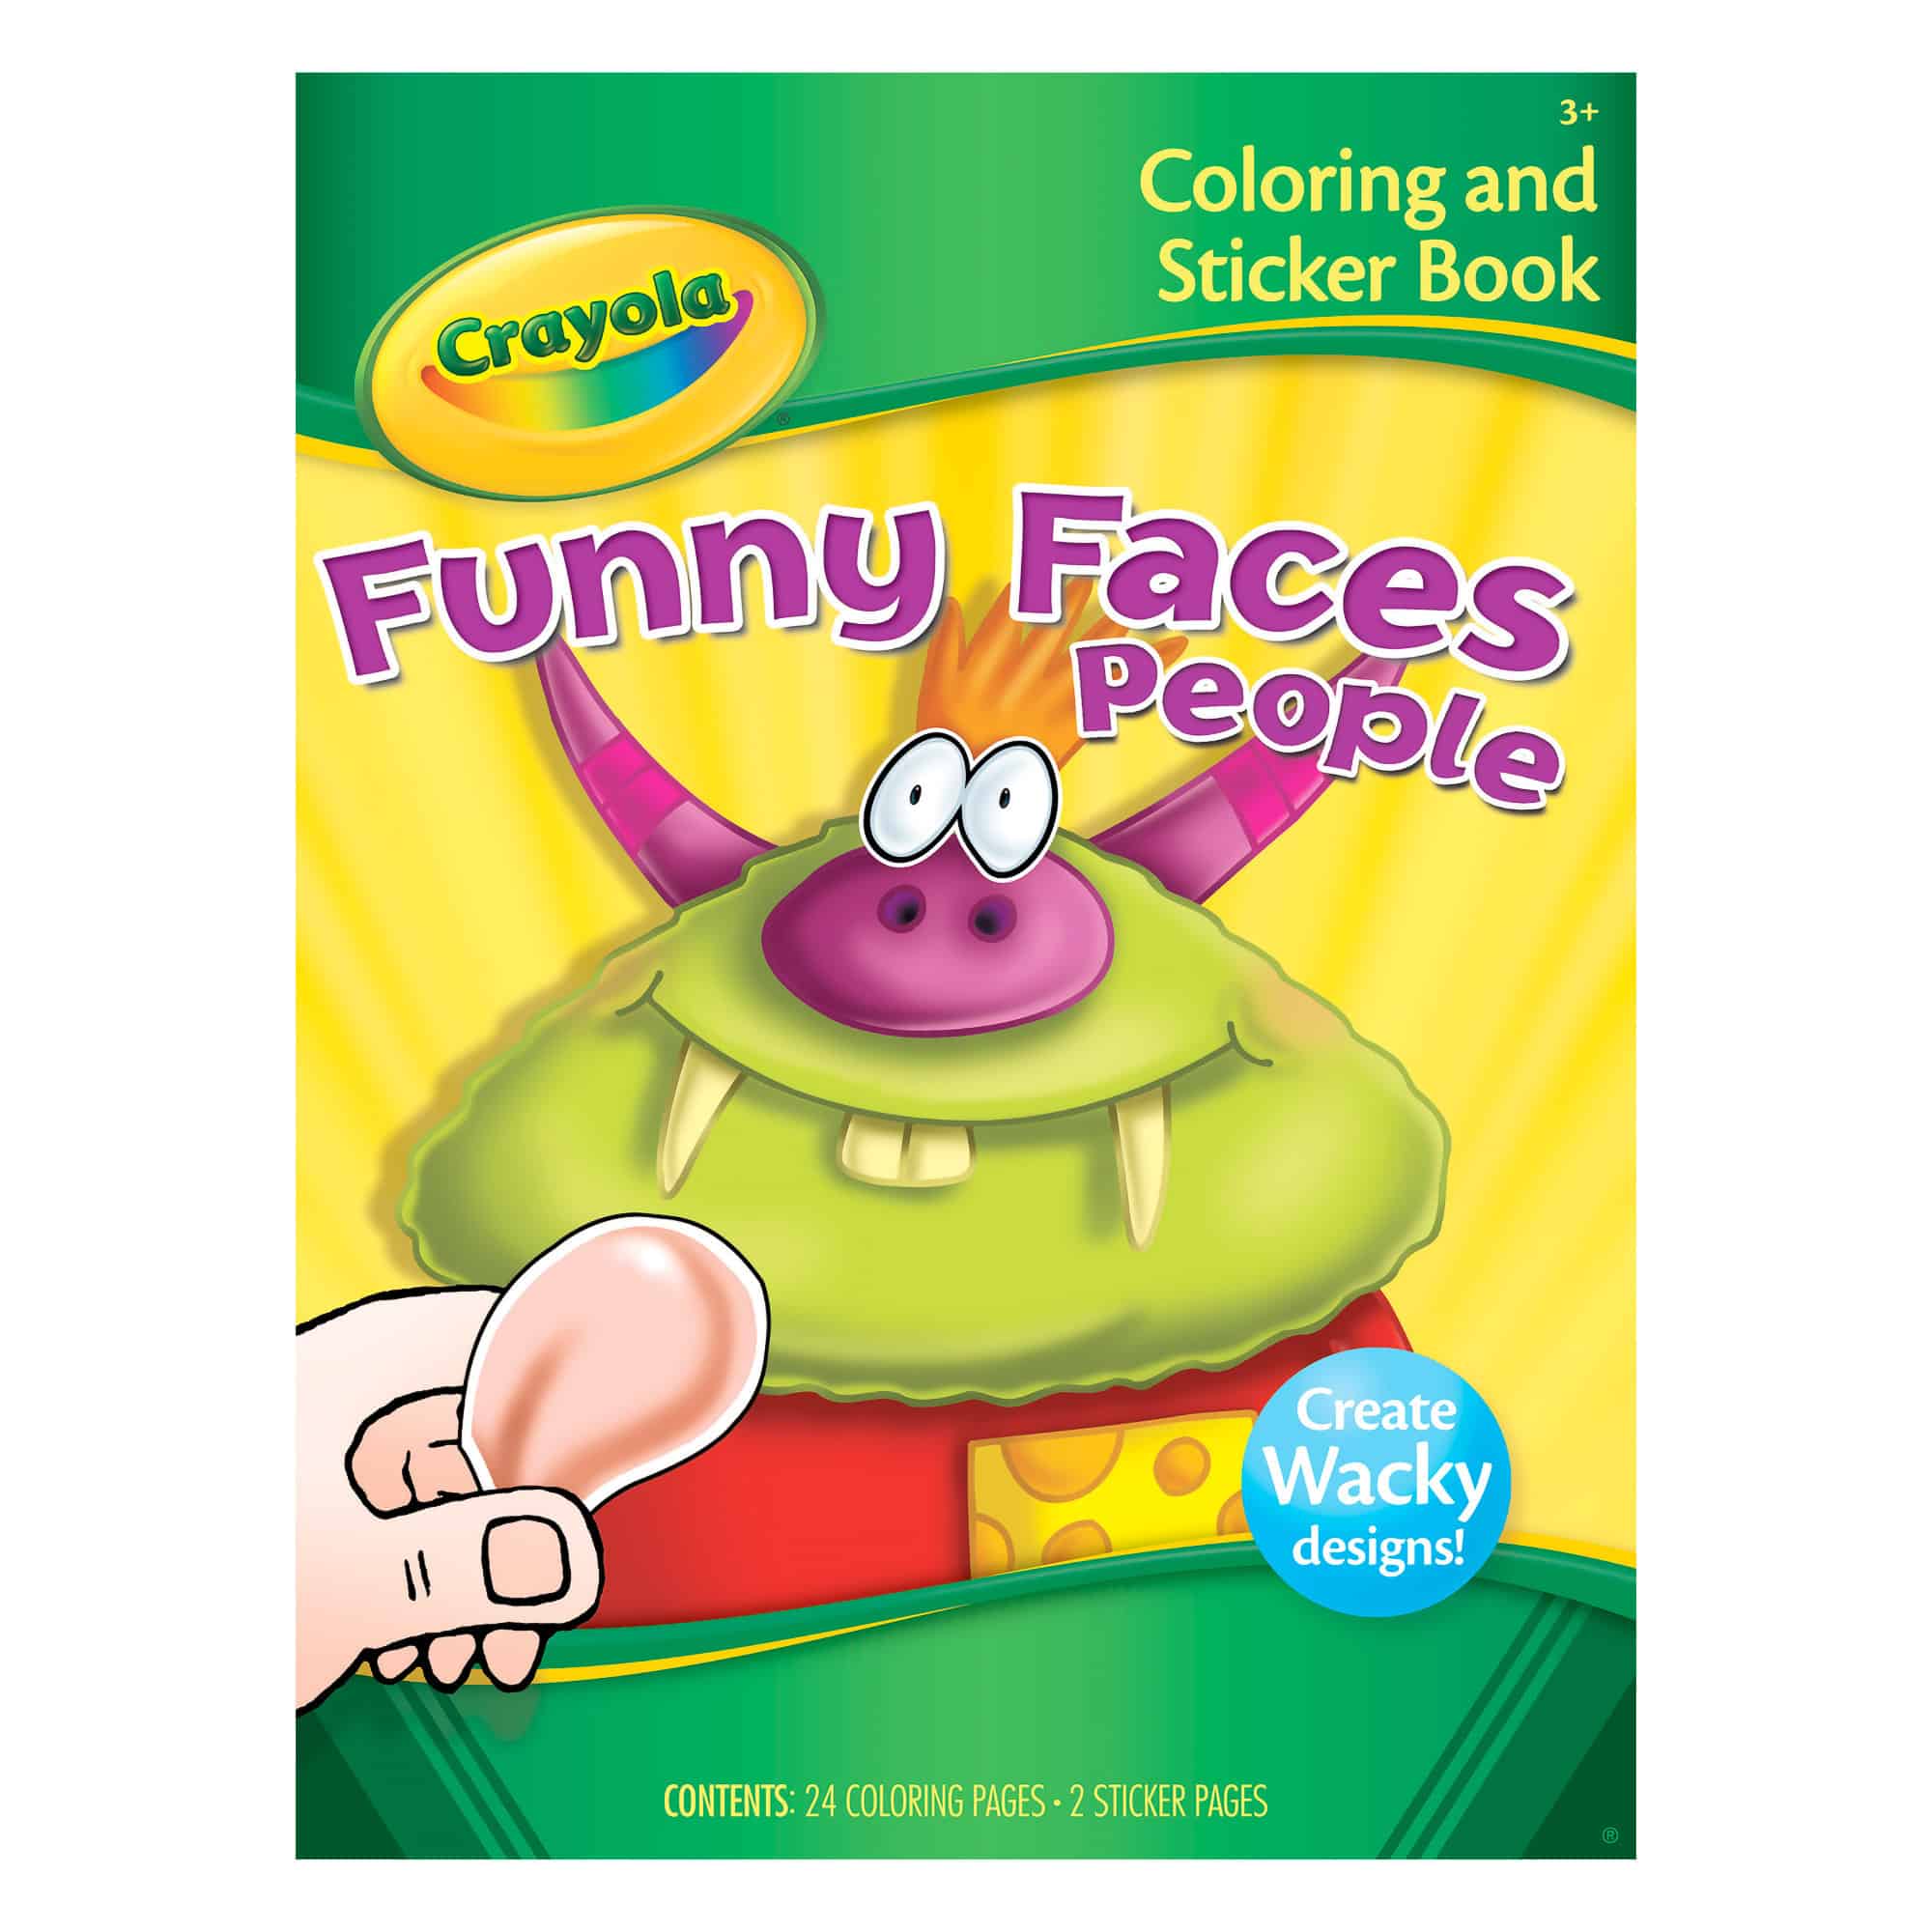 Crayola Funny Faces Colouring & Sticker Book - People